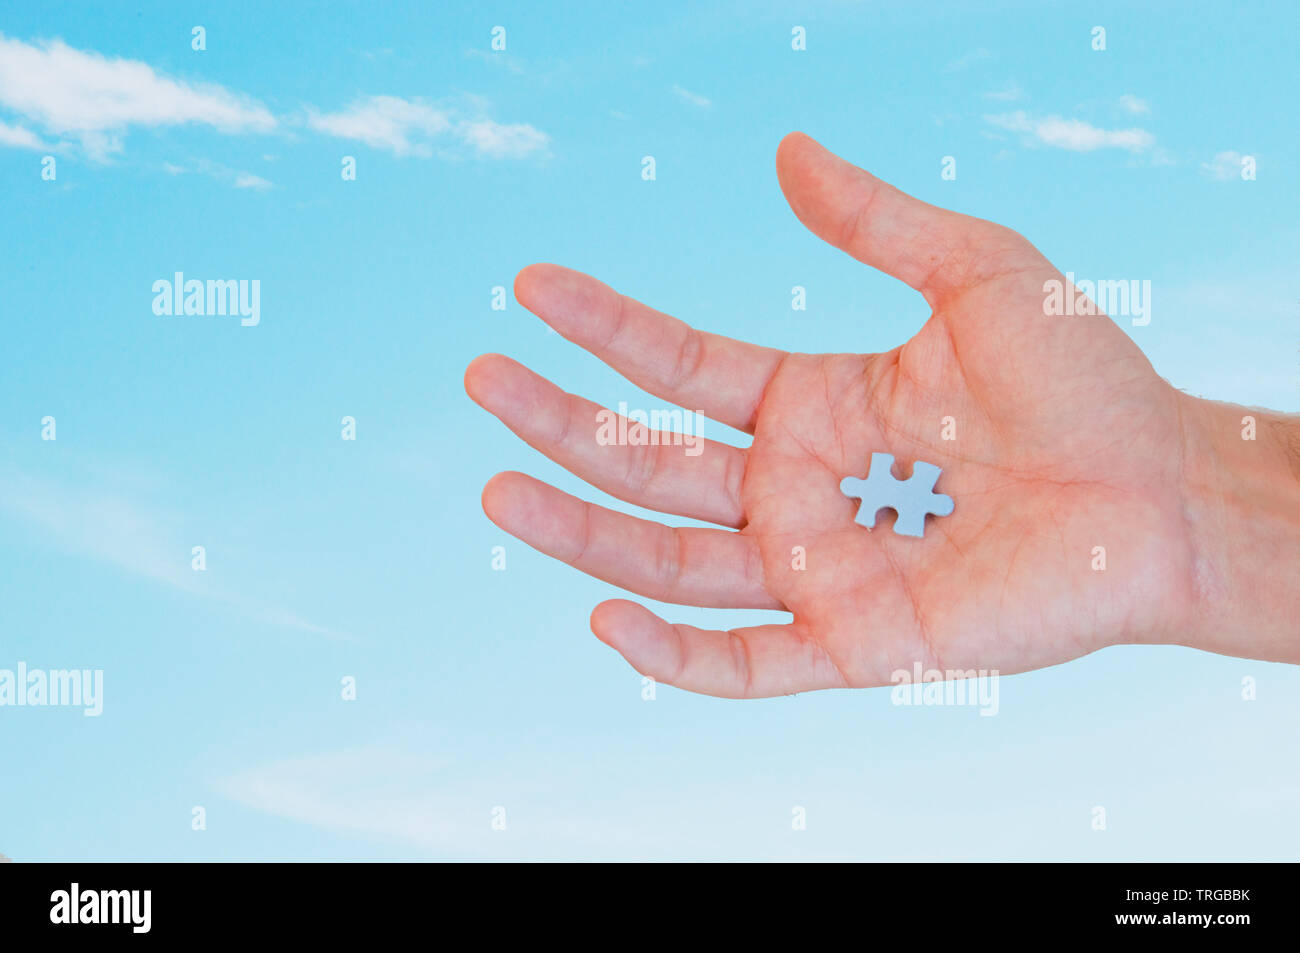 Piece of puzzle in man's hand. Stock Photo